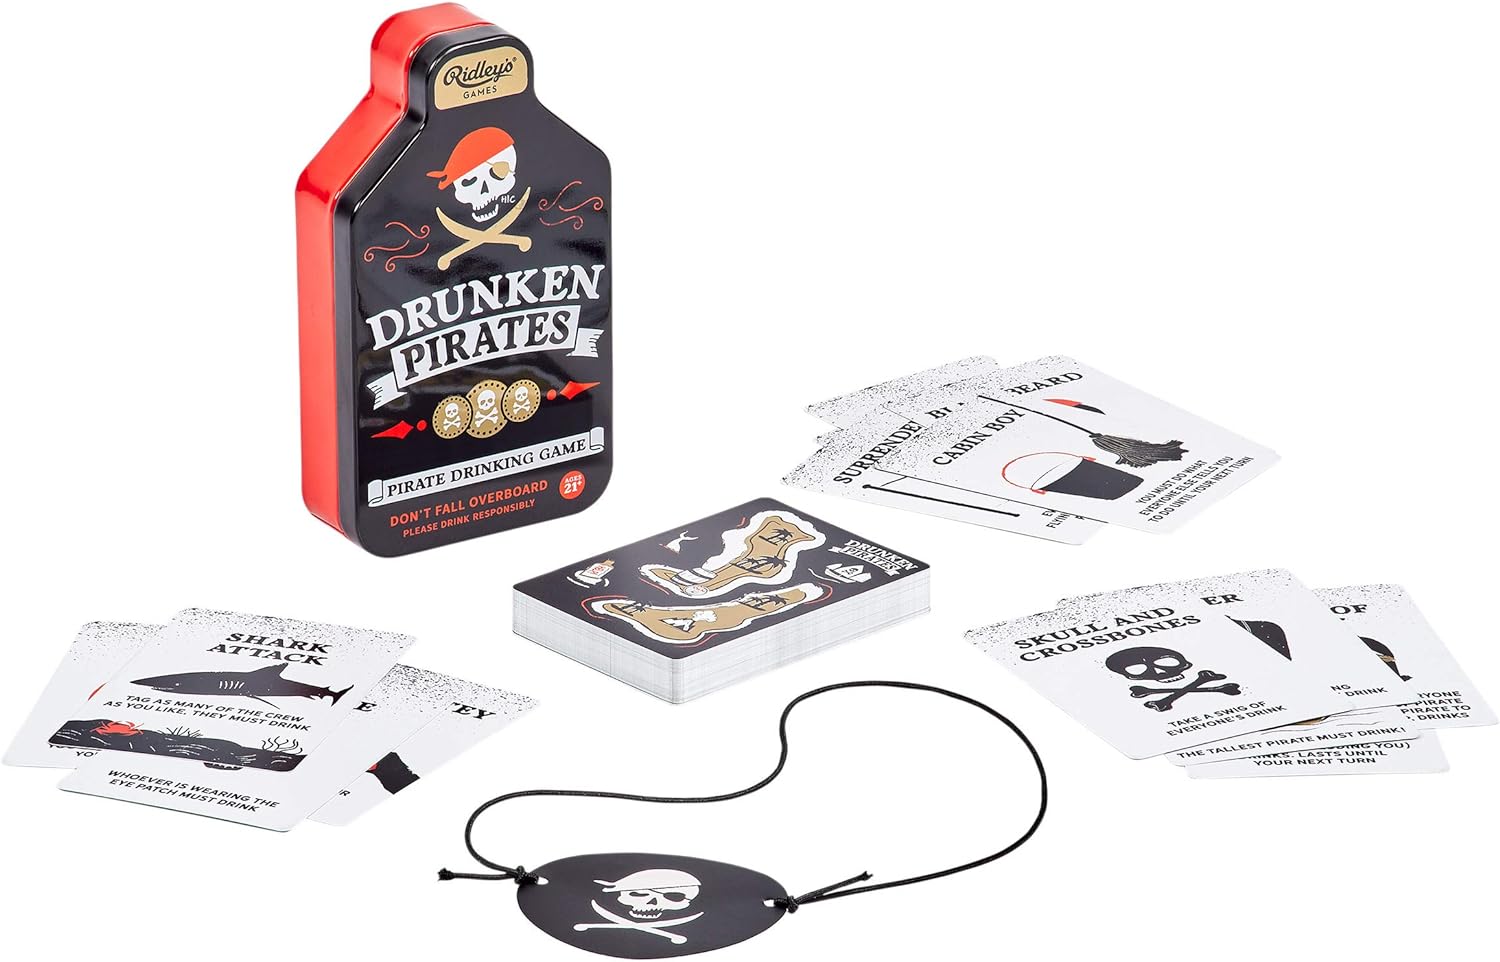 tin and cards for the drunken pirates card games arranged on a white background.